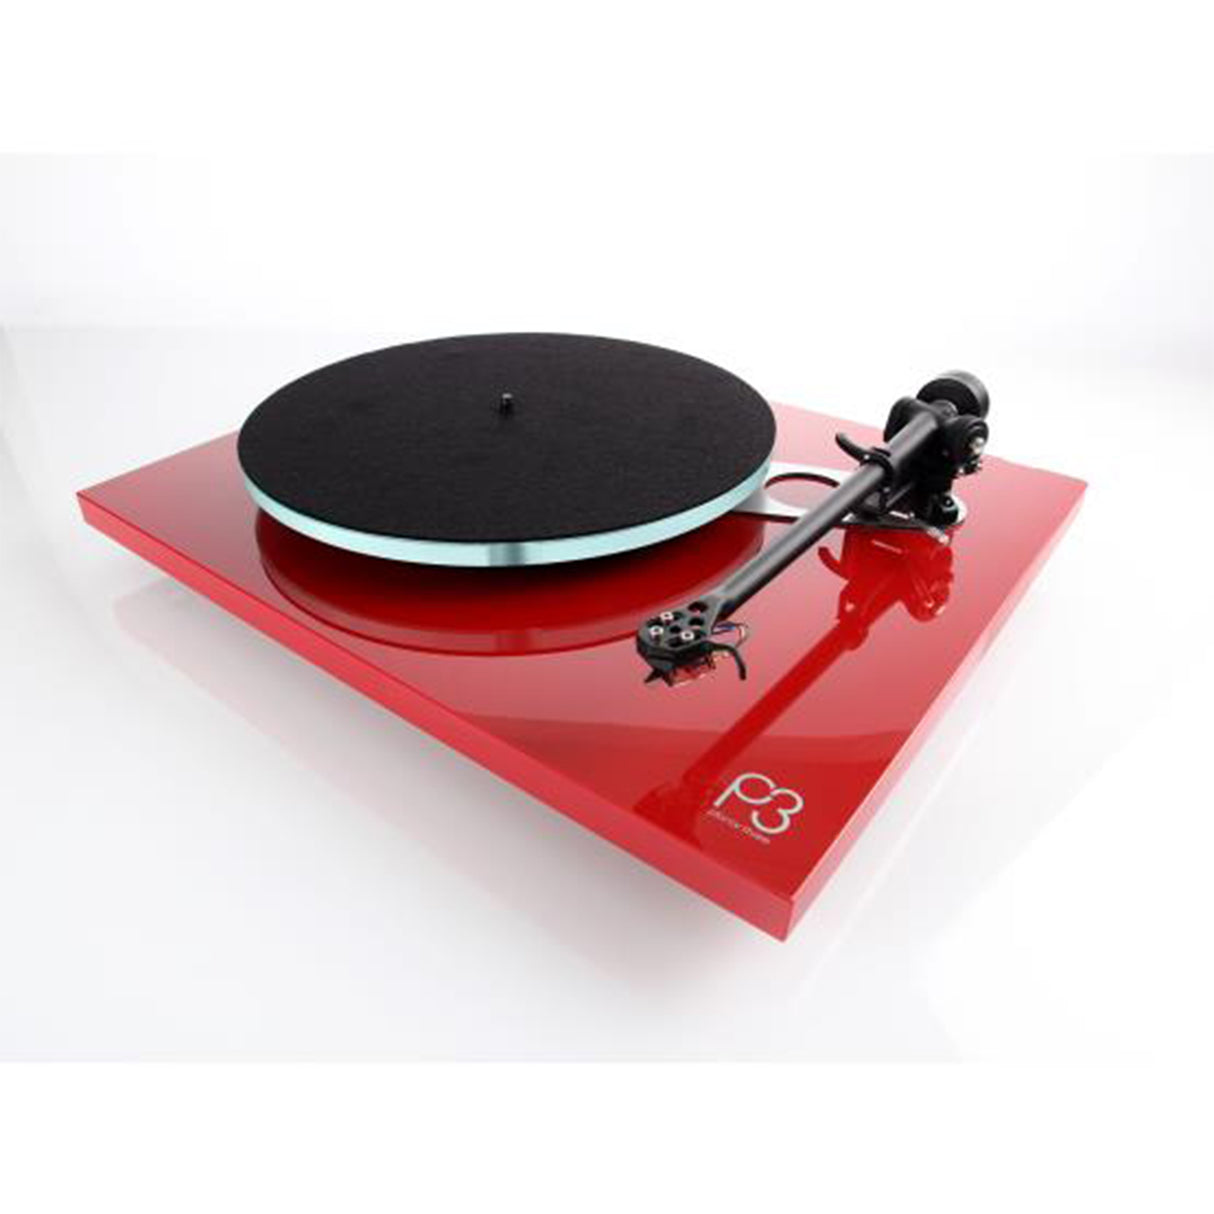 Rega Planar 3 Turntable with Exact MM Cartridge (Gloss Red Colour)